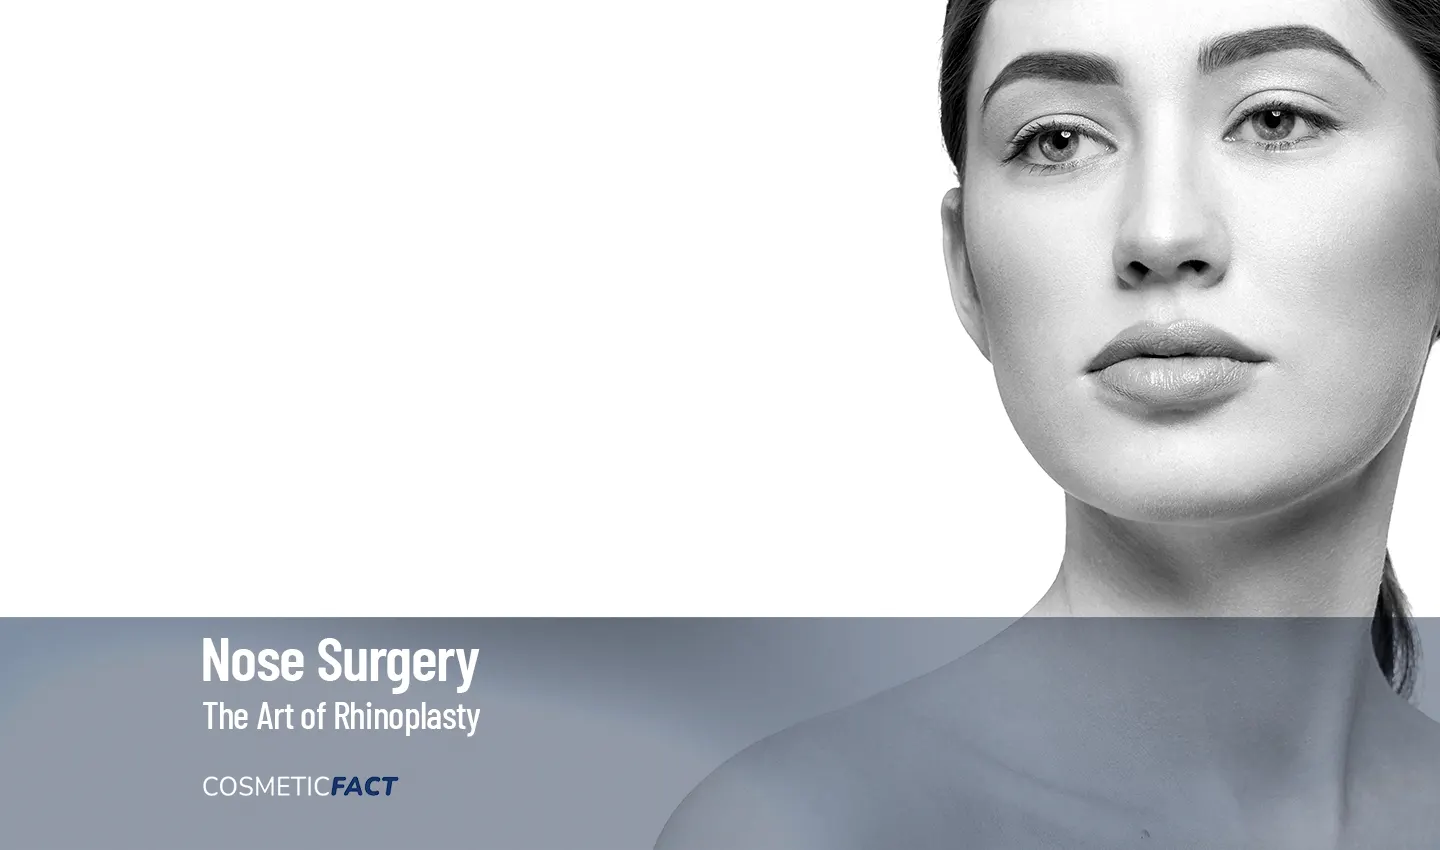 Woman showcasing the results of rhinoplasty surgery, highlighting how it can transform one's appearance and achieve an ideal nose shape.